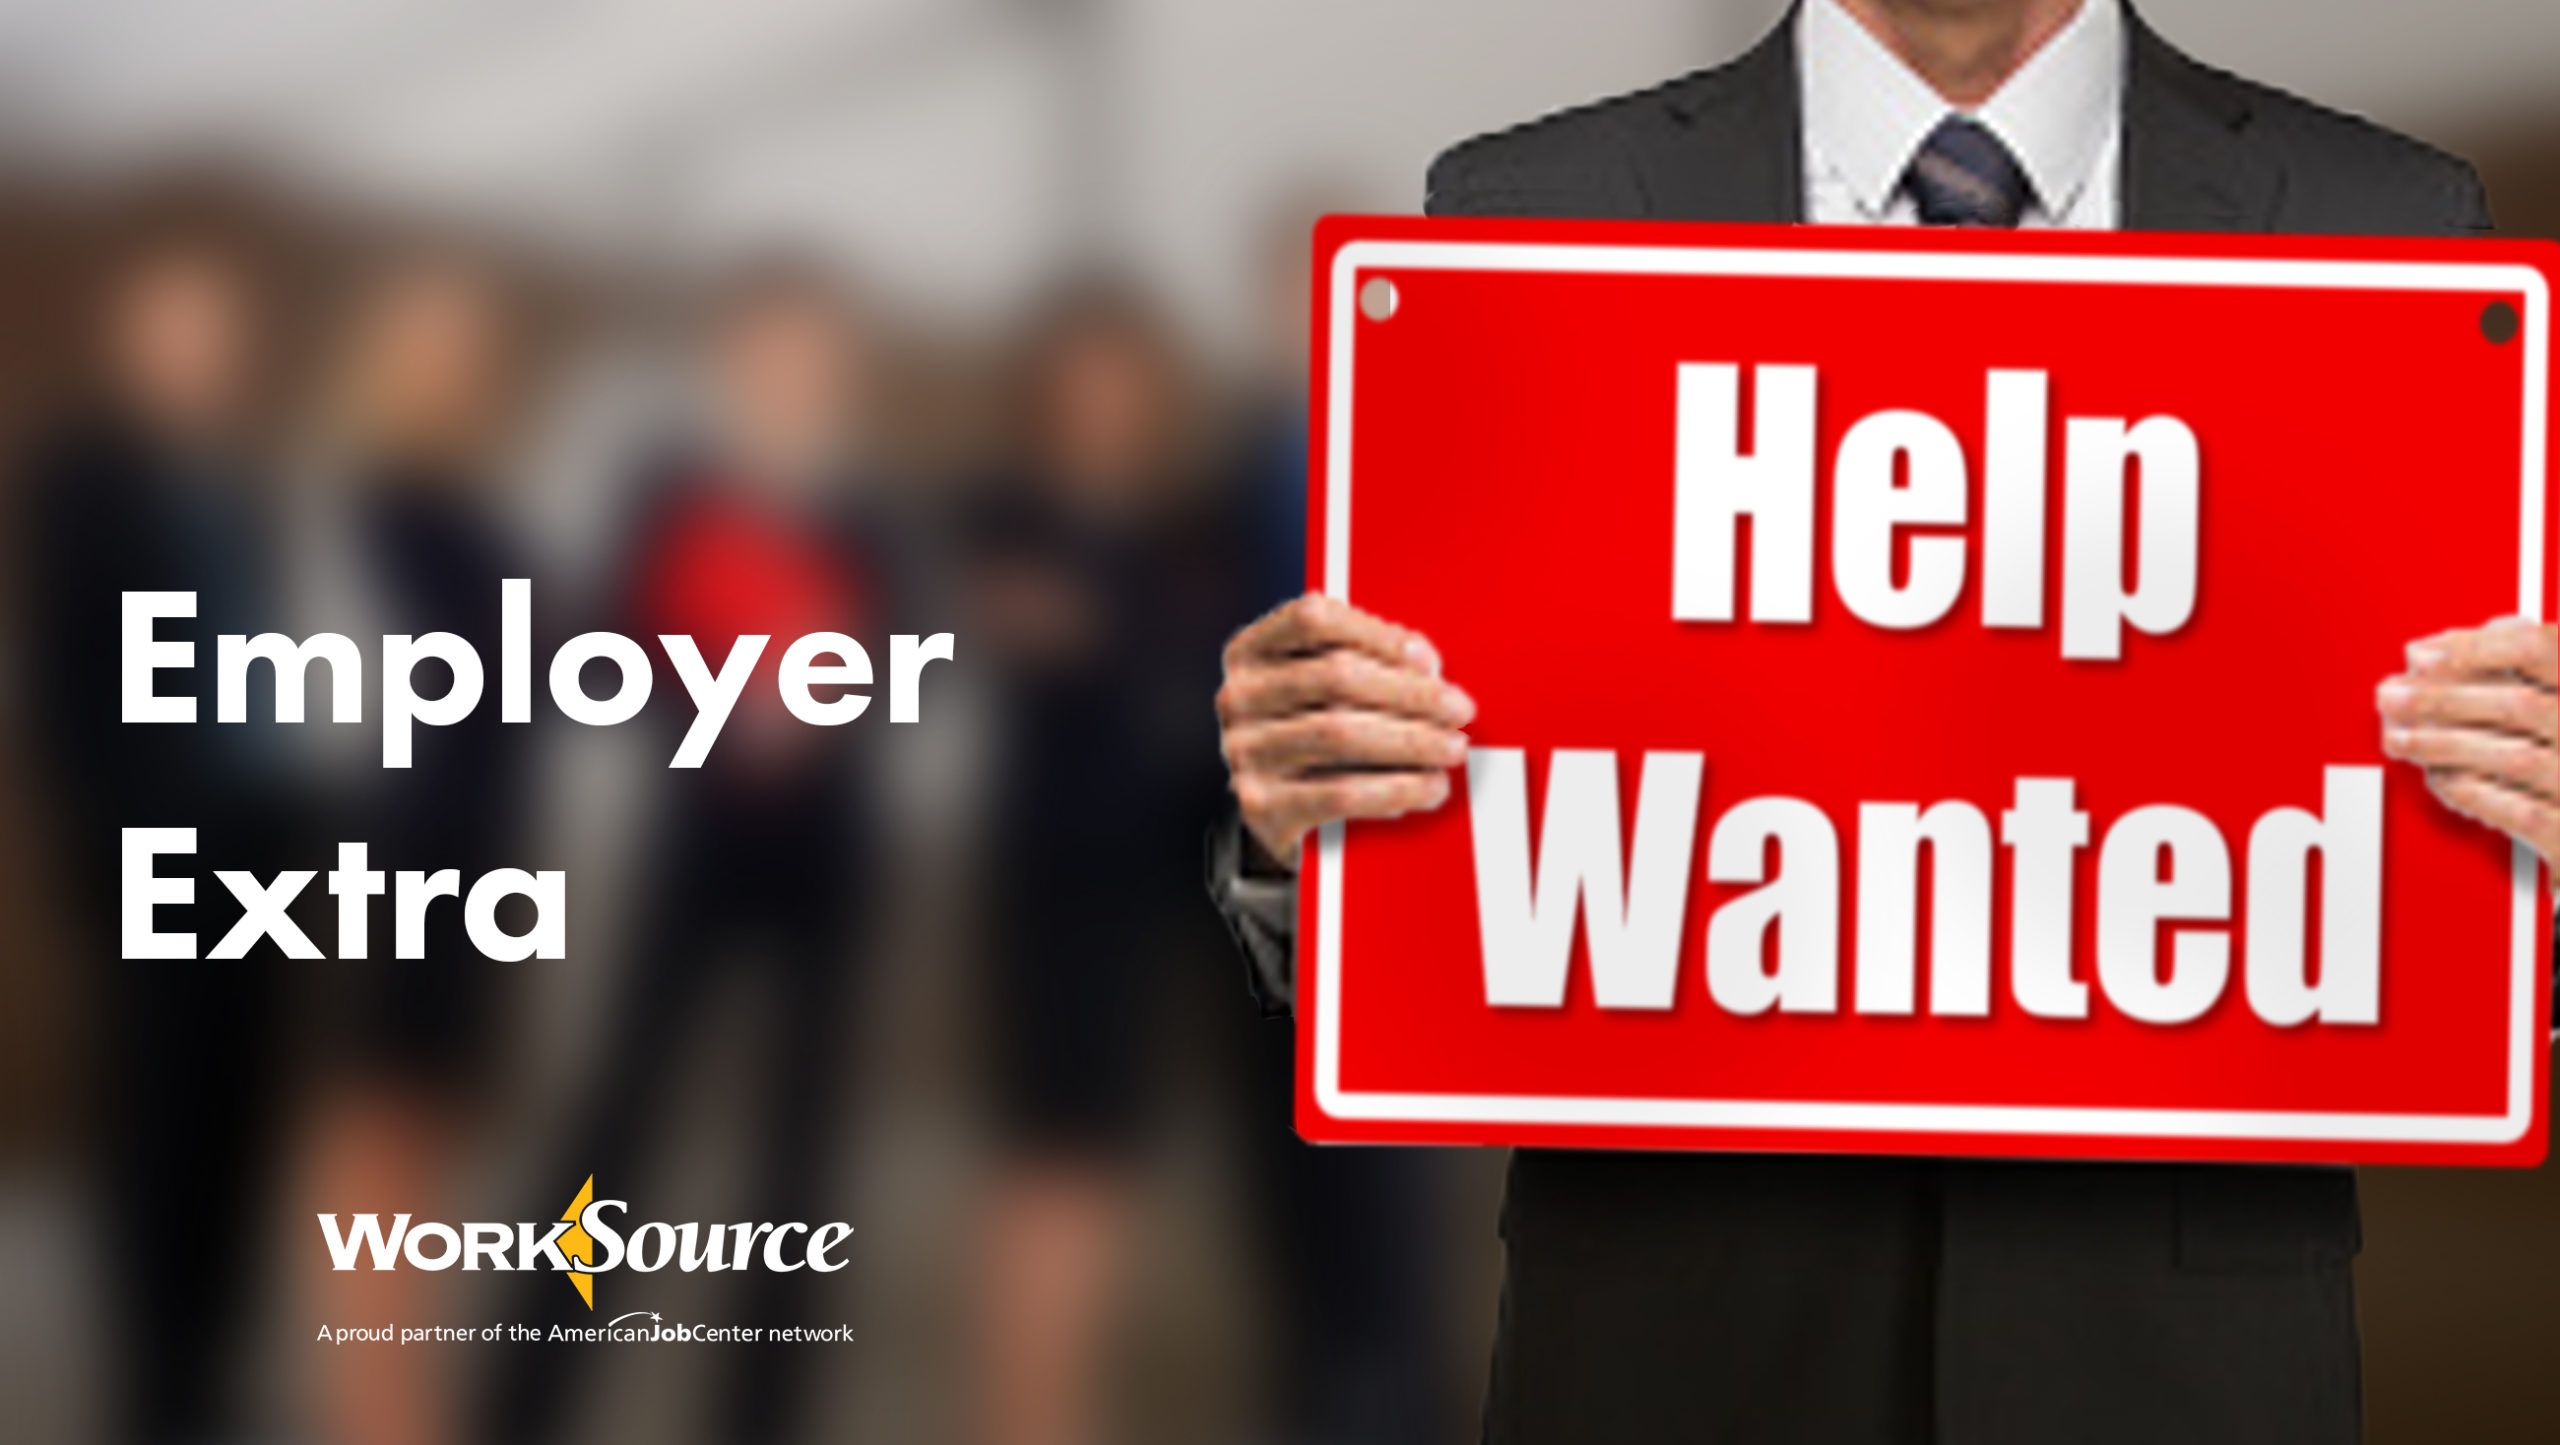 EMPLOYER EXTRA: Office Manager and HR Director positions 1